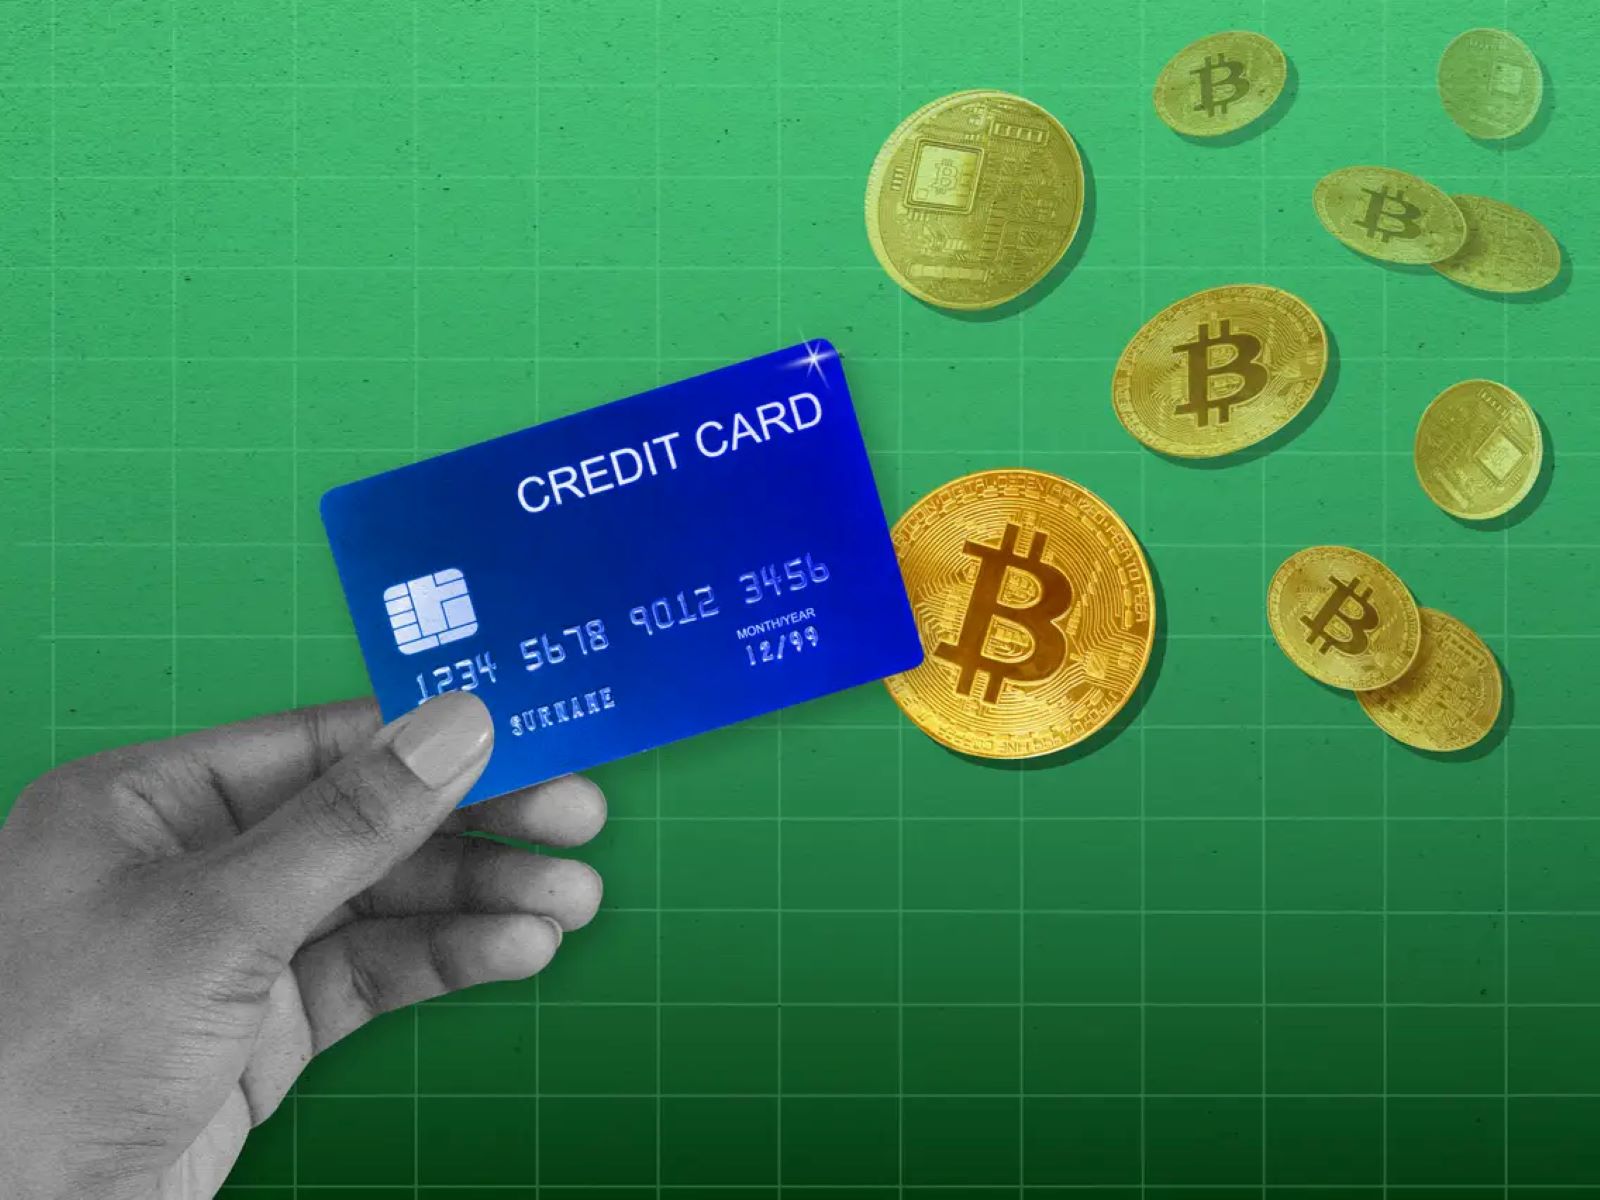 How To Buy Bitcoin With Credit Card On Cash App